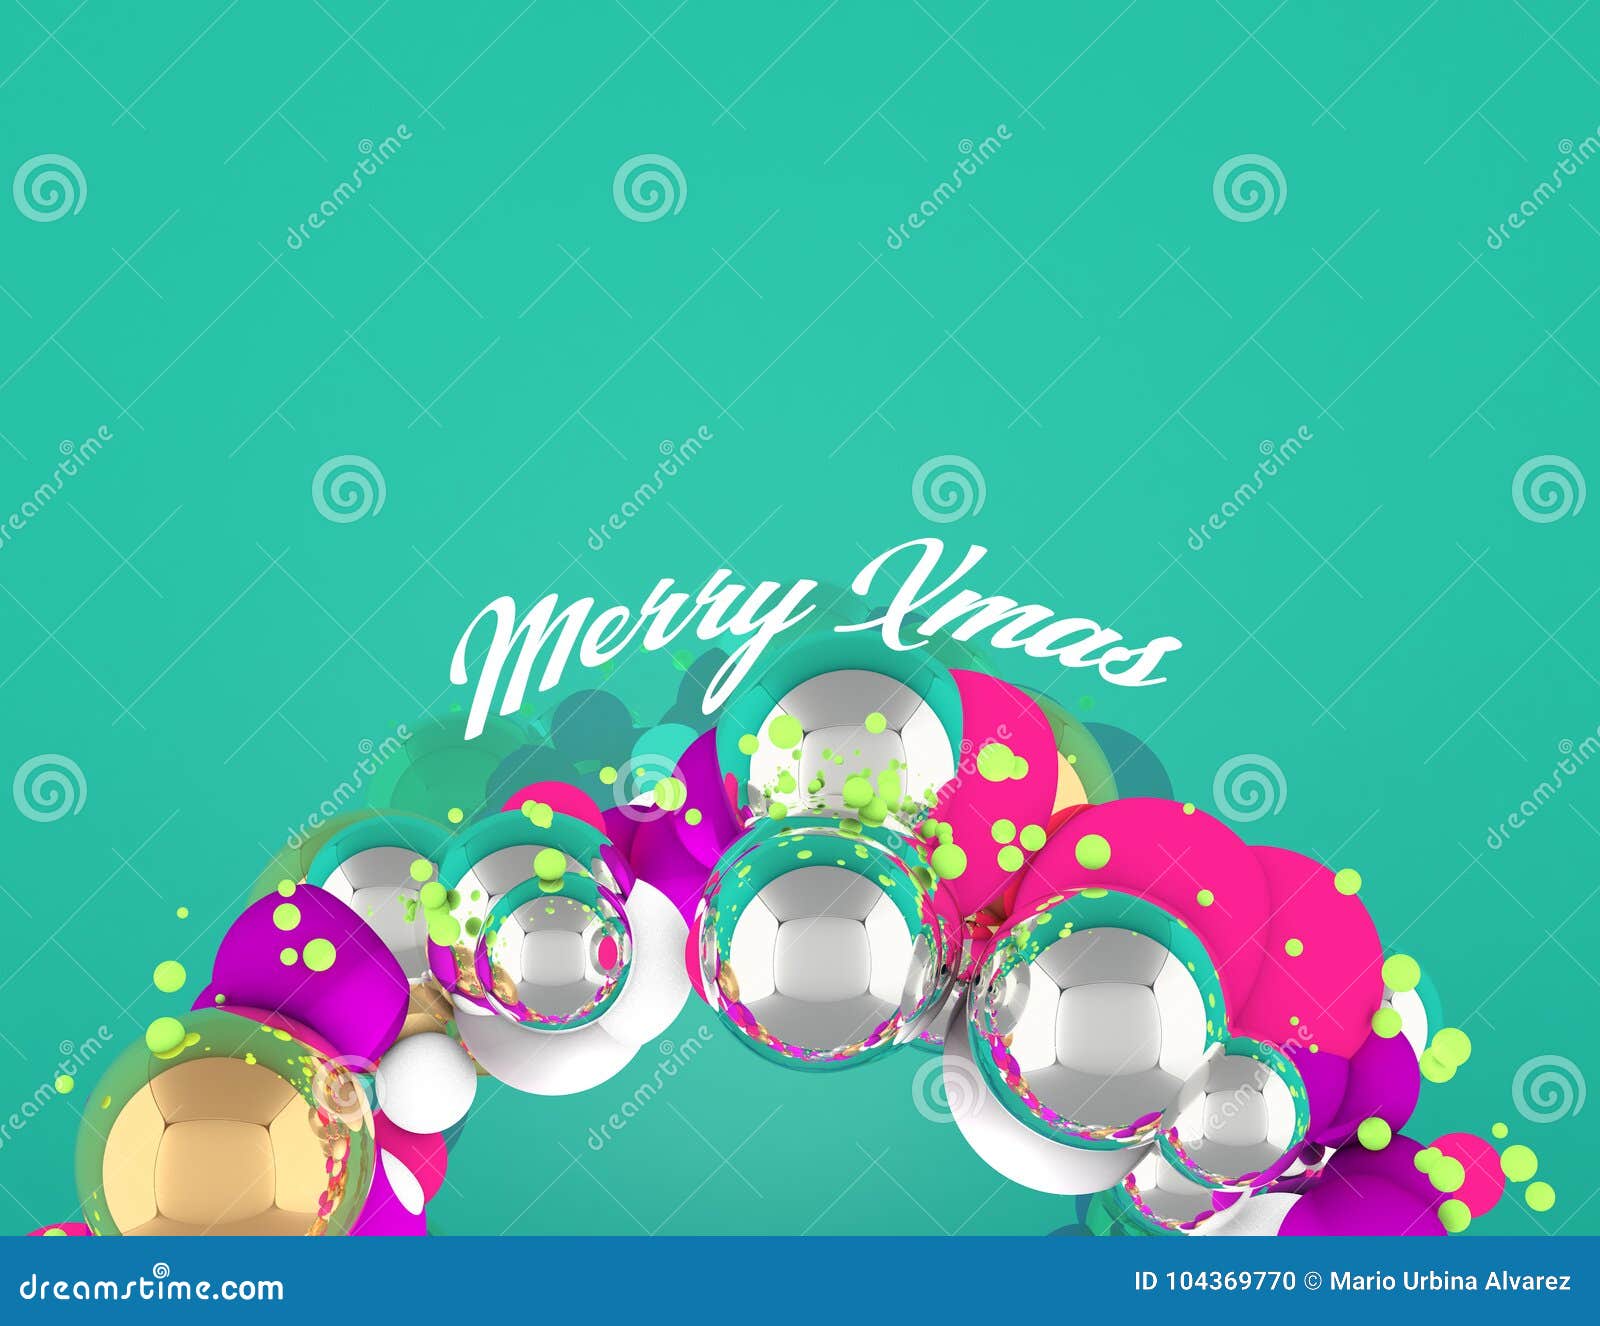 christmas wreath with spheres at bottom and green background, merry xmas.